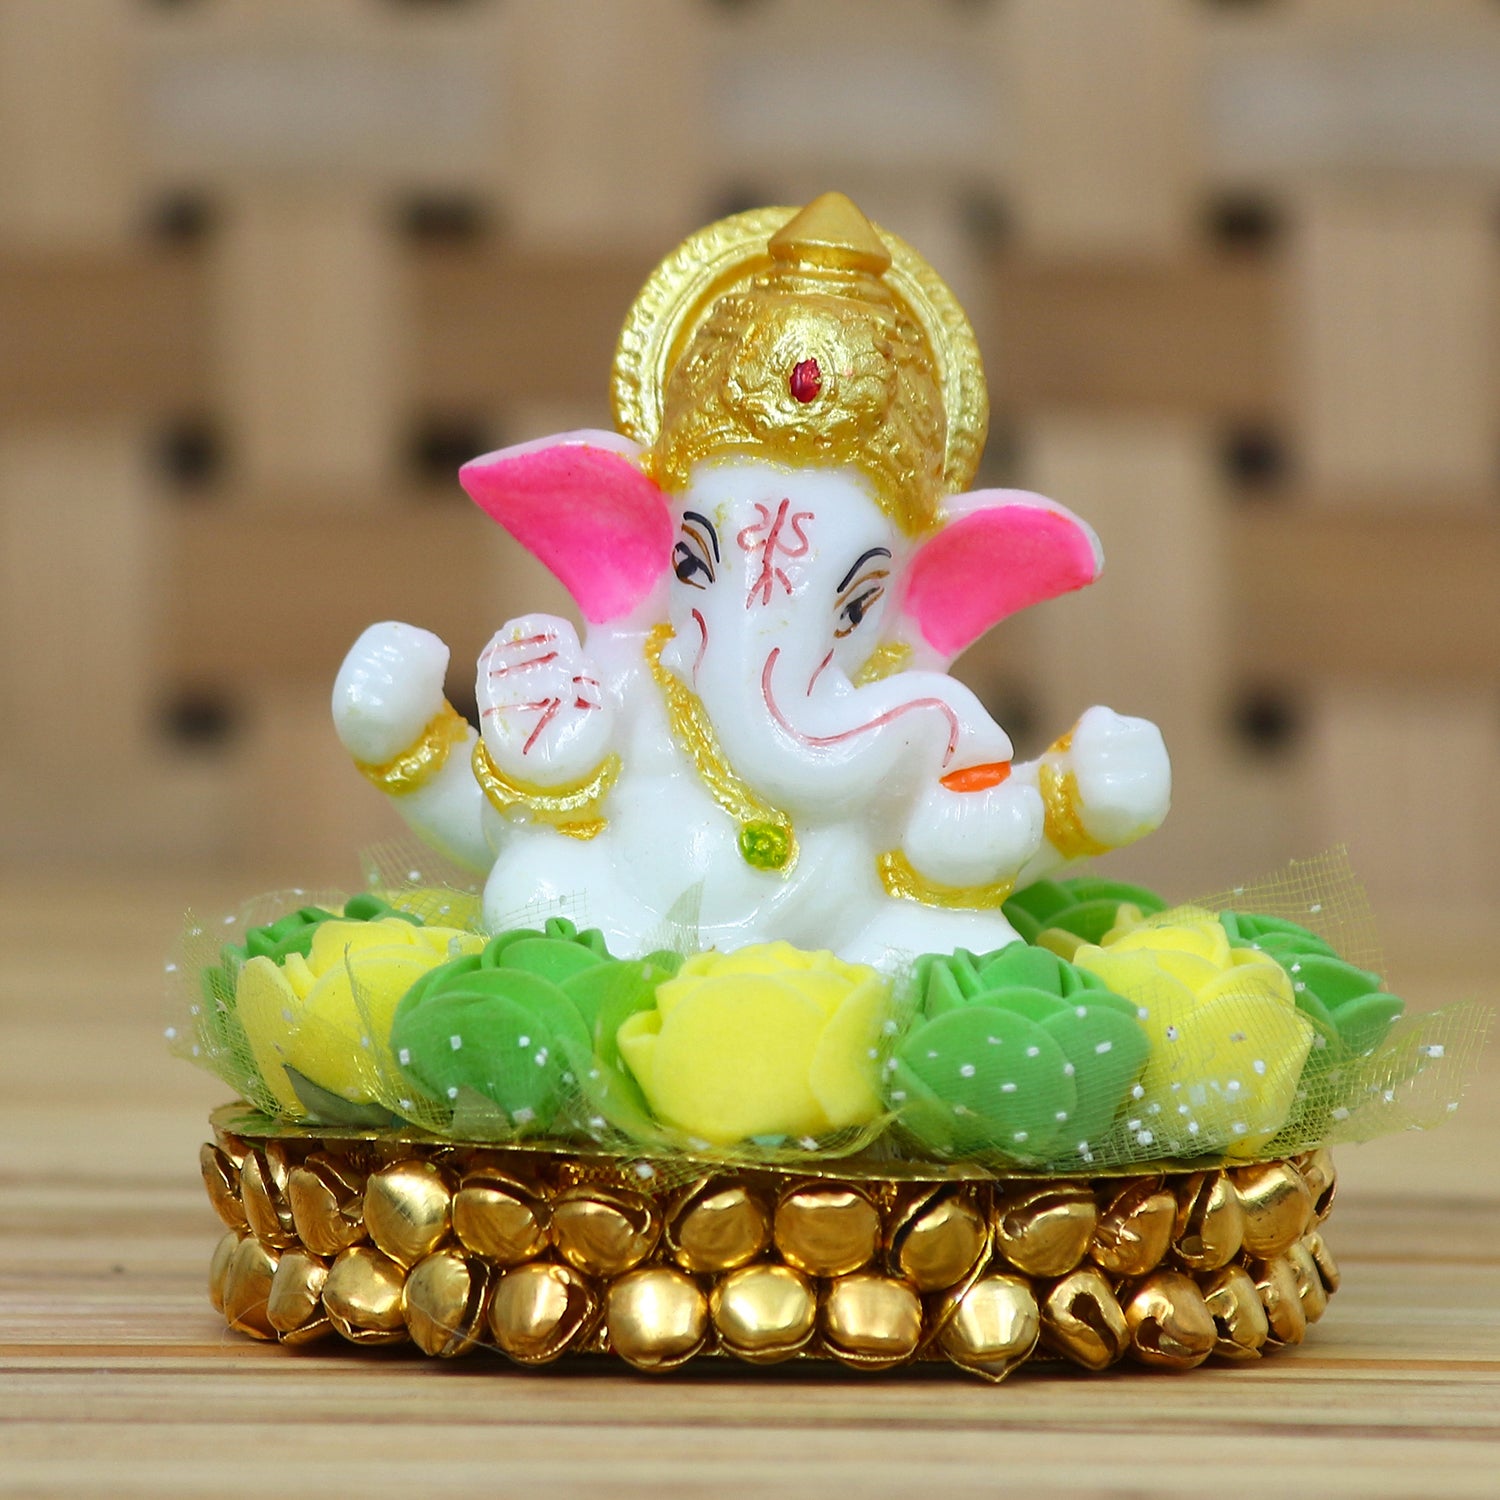 Lord Ganesha Idol On Decorative Handcrafted Green And Yellow Flowers Plate 1